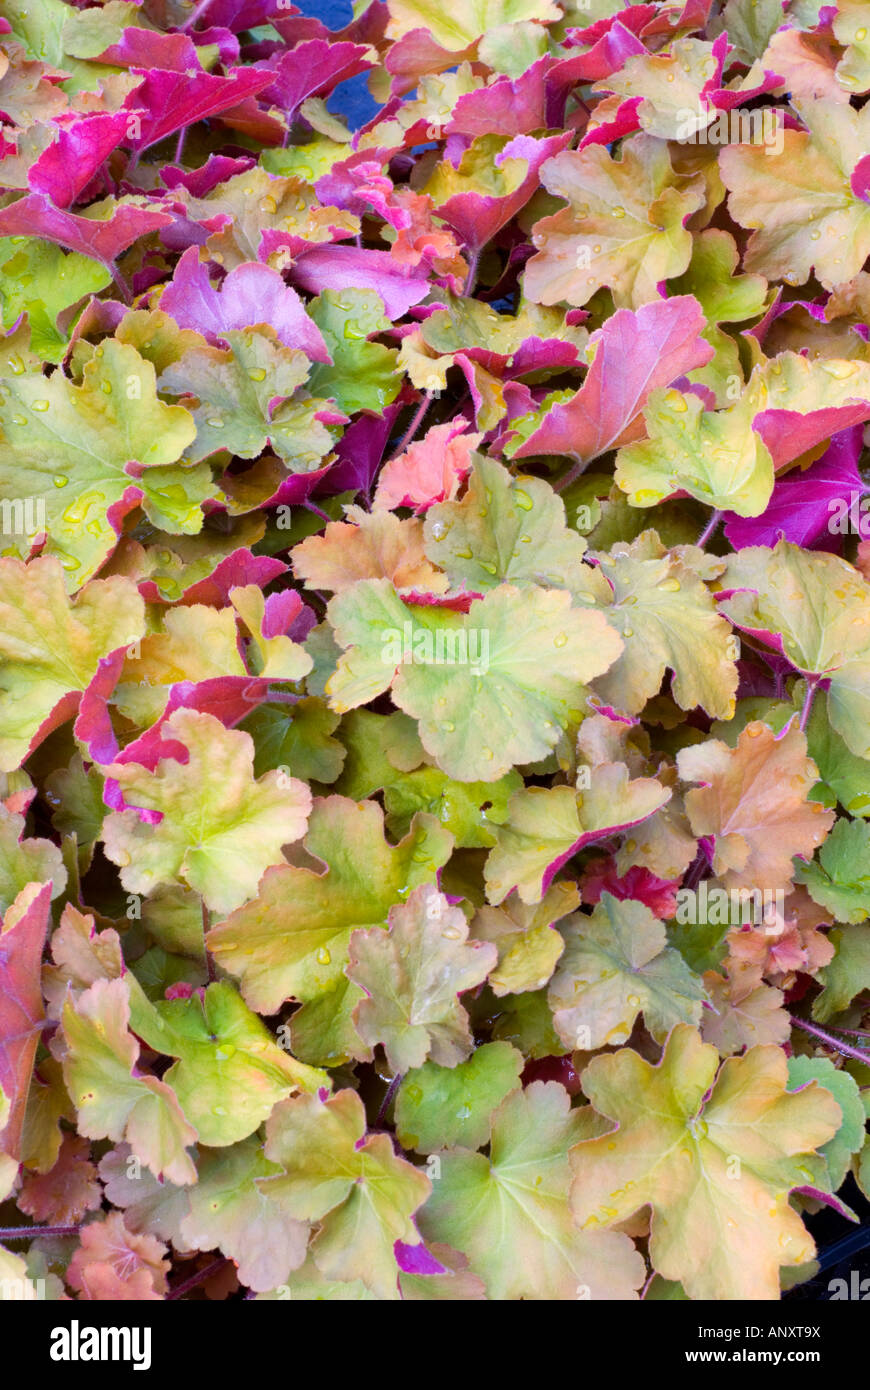 Heuchera 'Caramel' foliage leaves in many colors colours groundcover perennial, pink yellow green purple contrasts shade garden Stock Photo